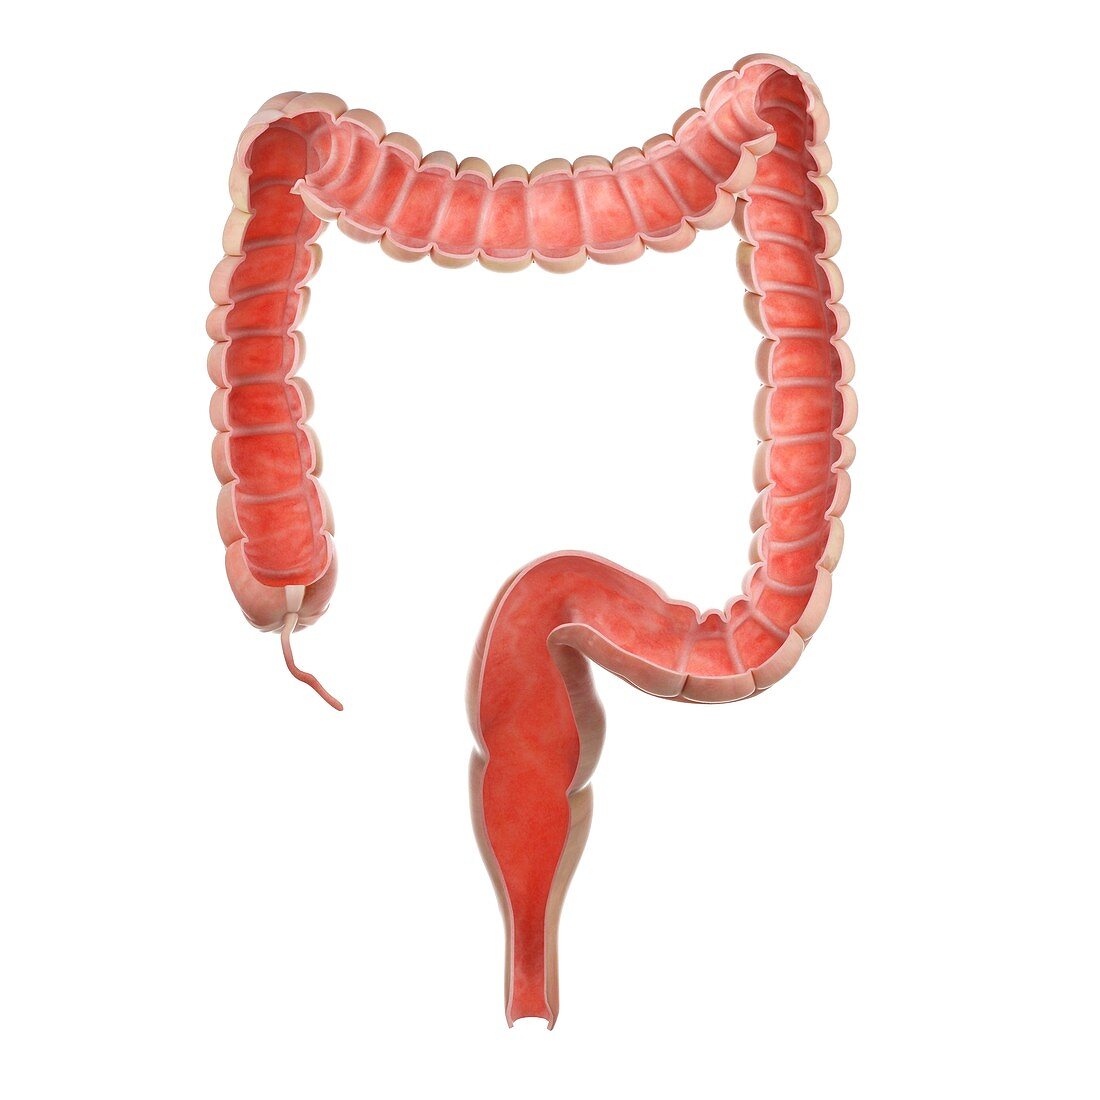 Illustration of a tumour in the rectum